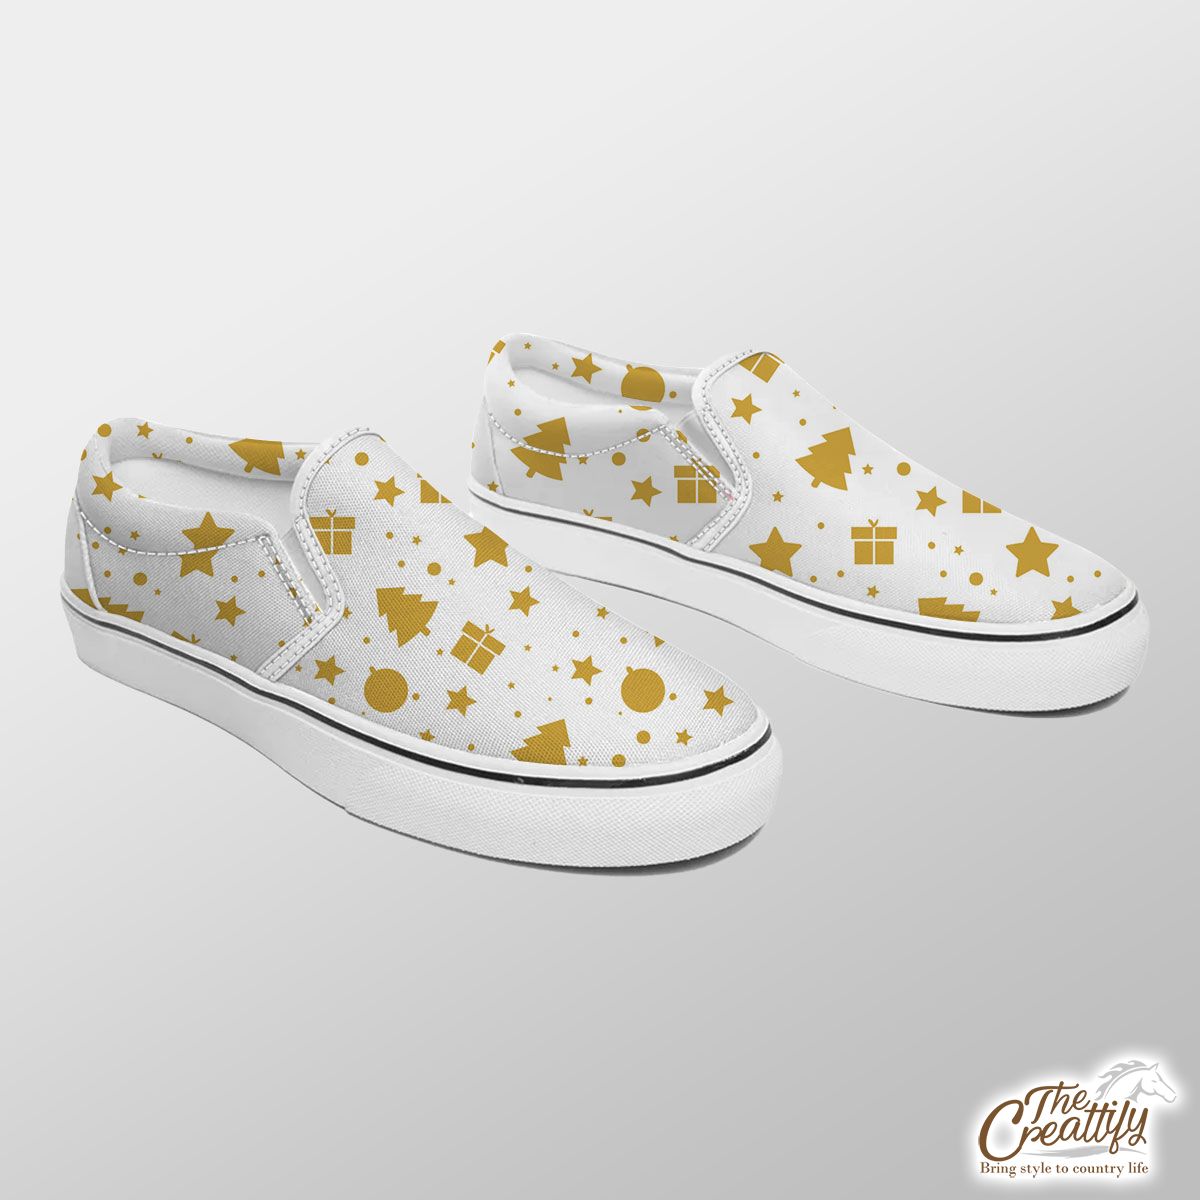 Christmas Gifts, Baudles And Pine Tree Silhouette Filled In Gold Color Pattern Slip On Sneakers